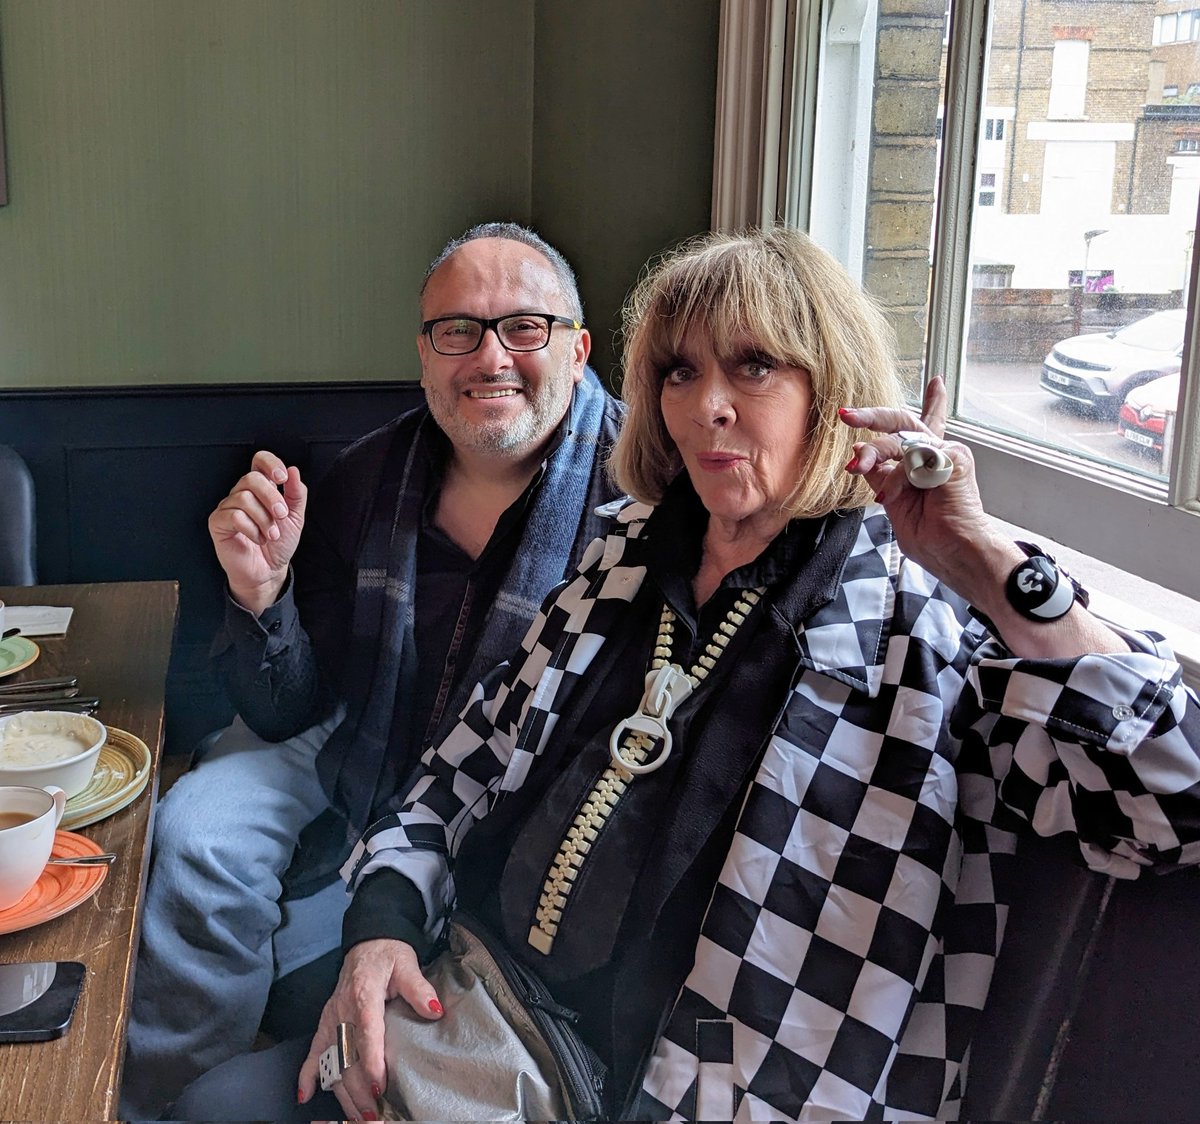 Eighteen months shy of 90 years old the wonderful acting legend that is Amanda Barrie. Such a joyous entertaining lady. Much laughter with her at an event in London today.